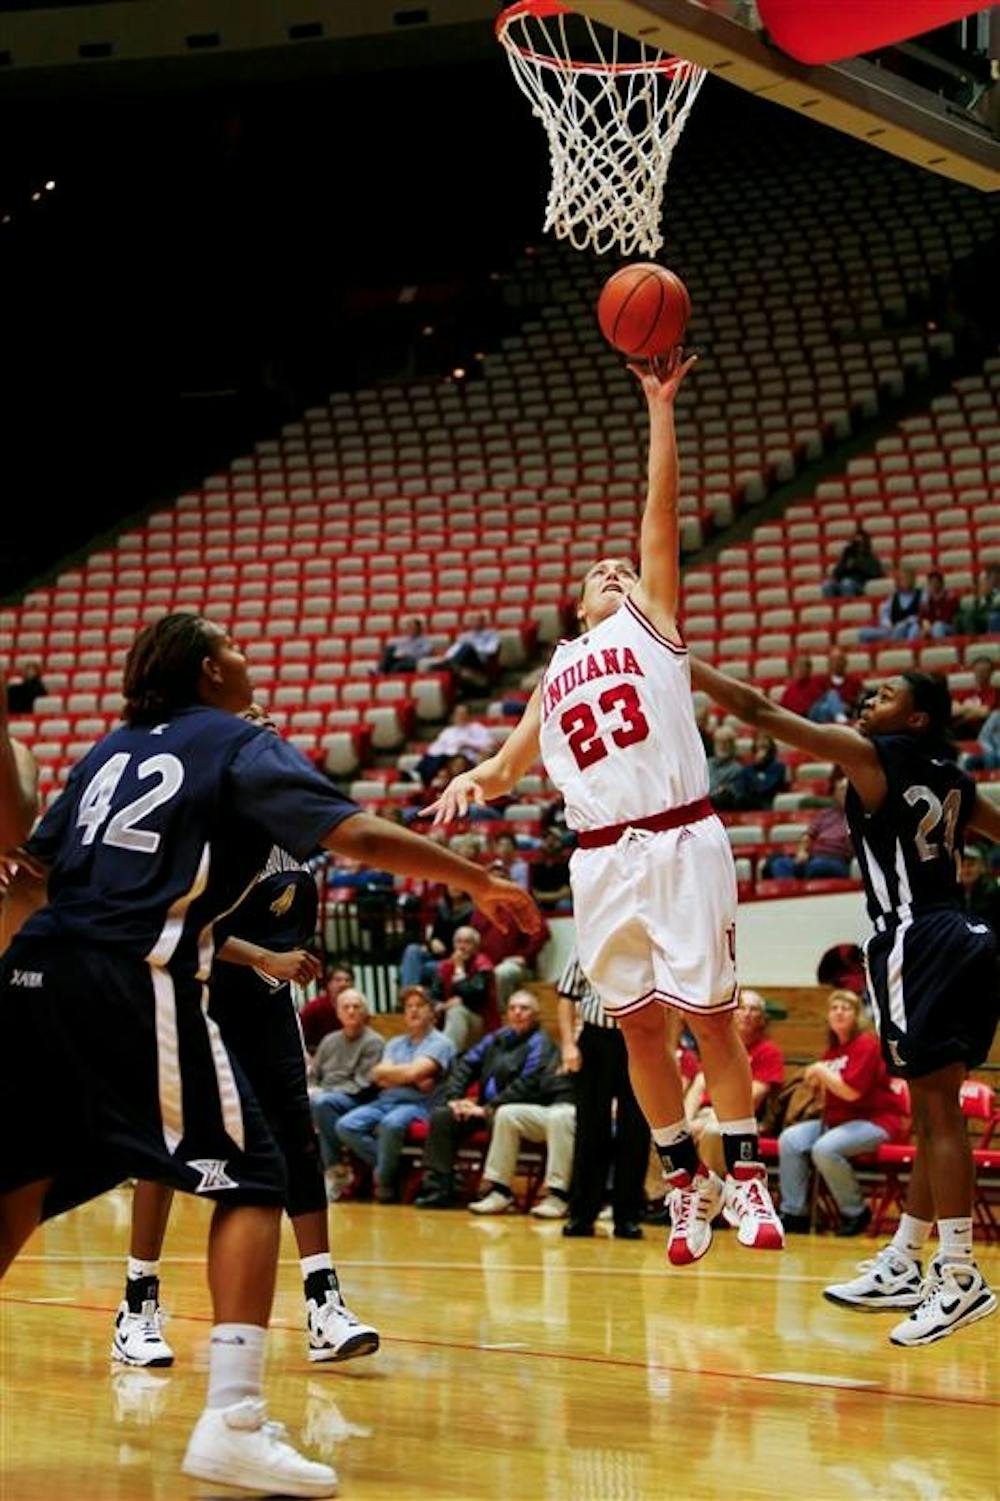 Junior guard Jamie Braun shoots a layup during the Hoosiers 62-59 loss to Xavier in the second round of the Preseason WNIT on Sunday, Nov. 16 at Assembly Hall.